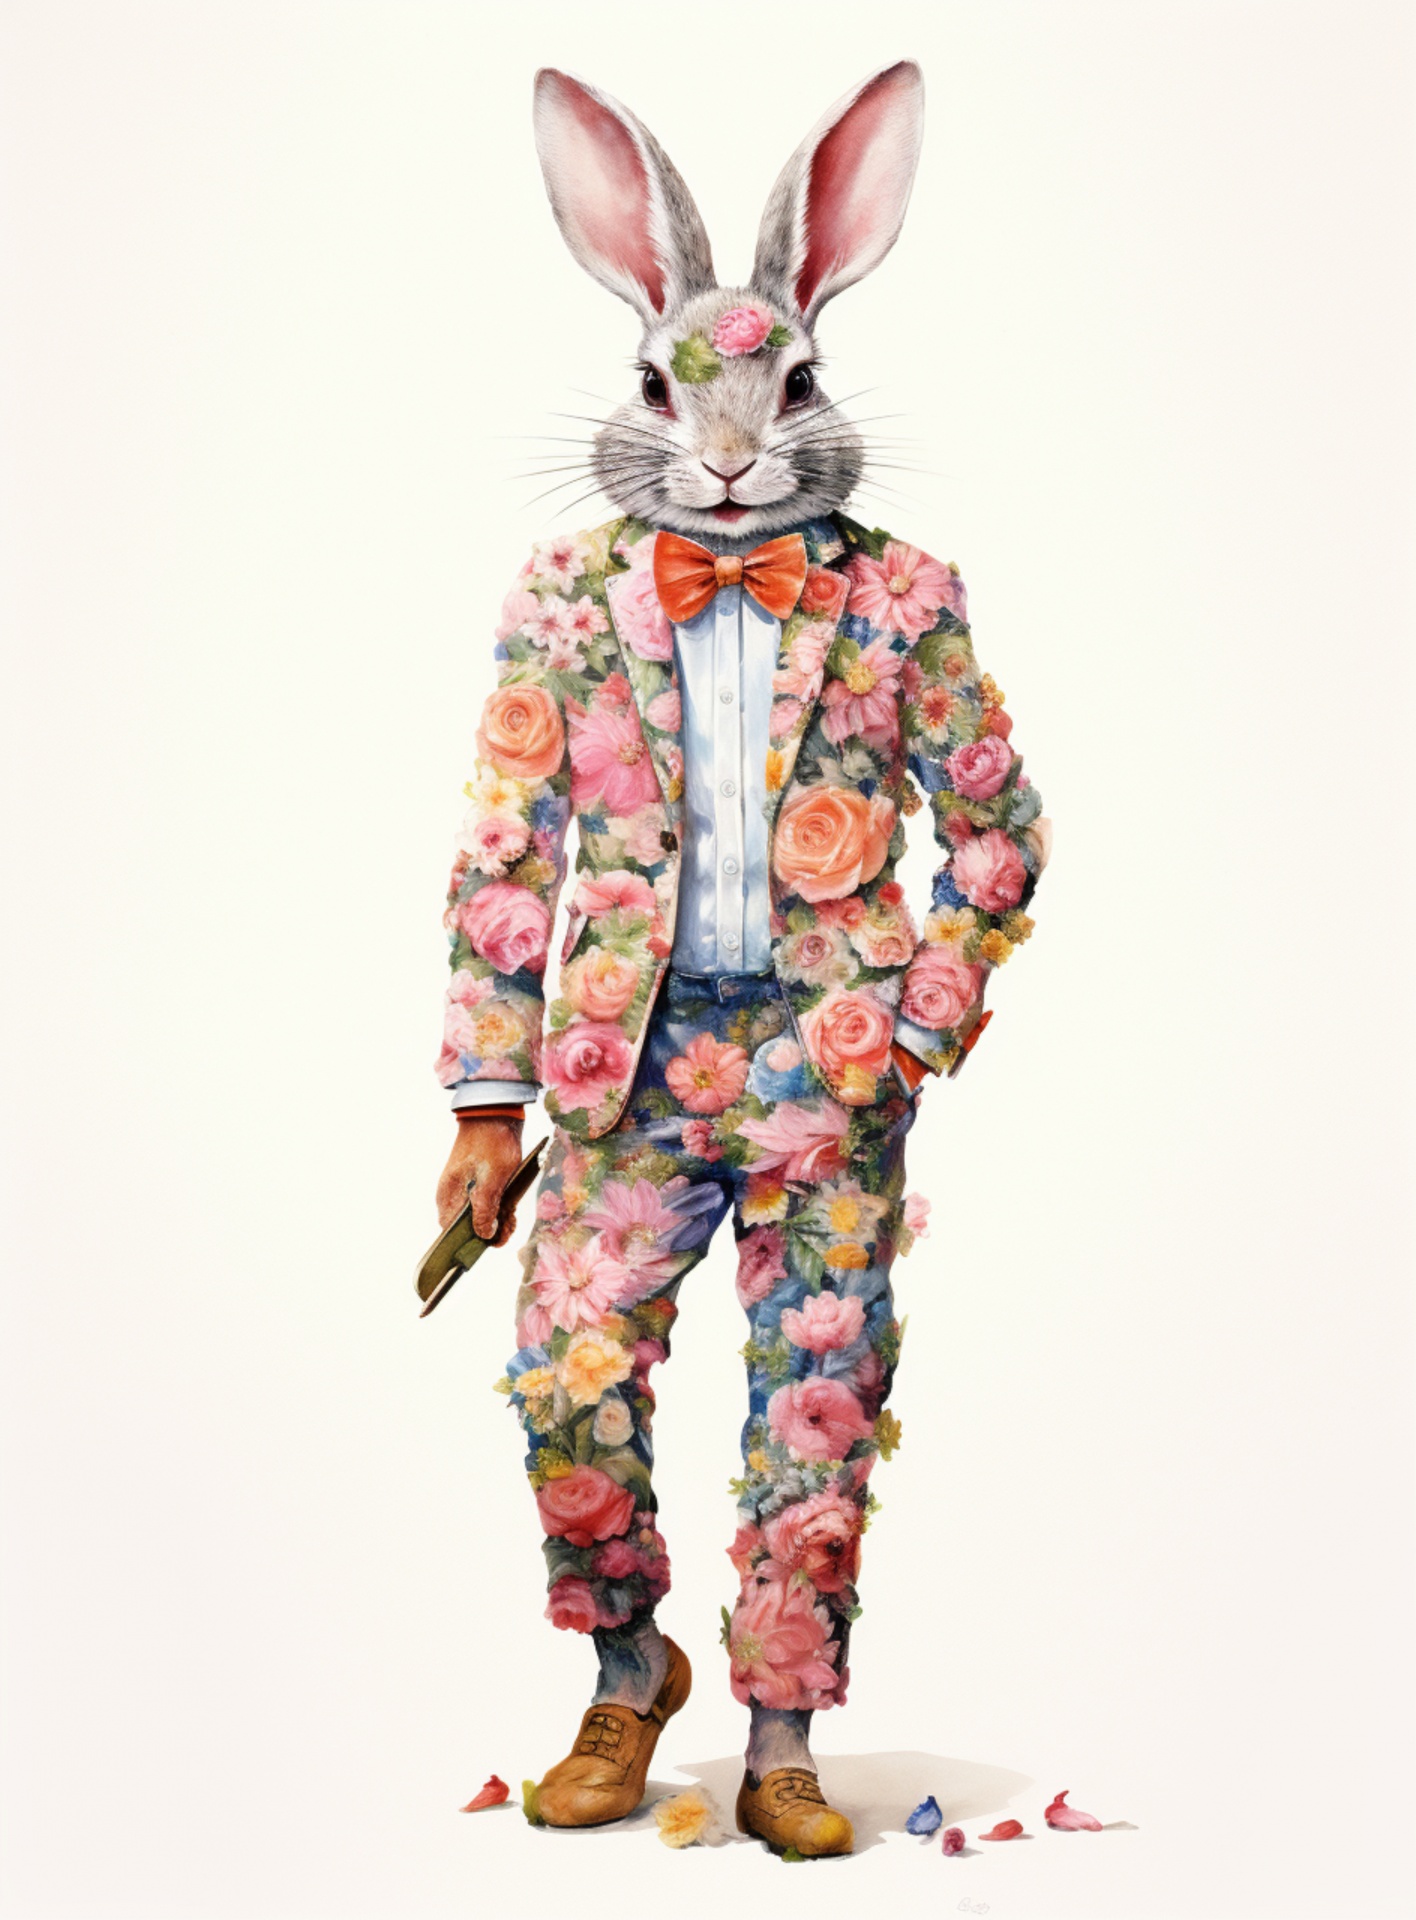 Funny Rabbit In Suit Of Flowers Free Stock Photo - Public Domain Pictures